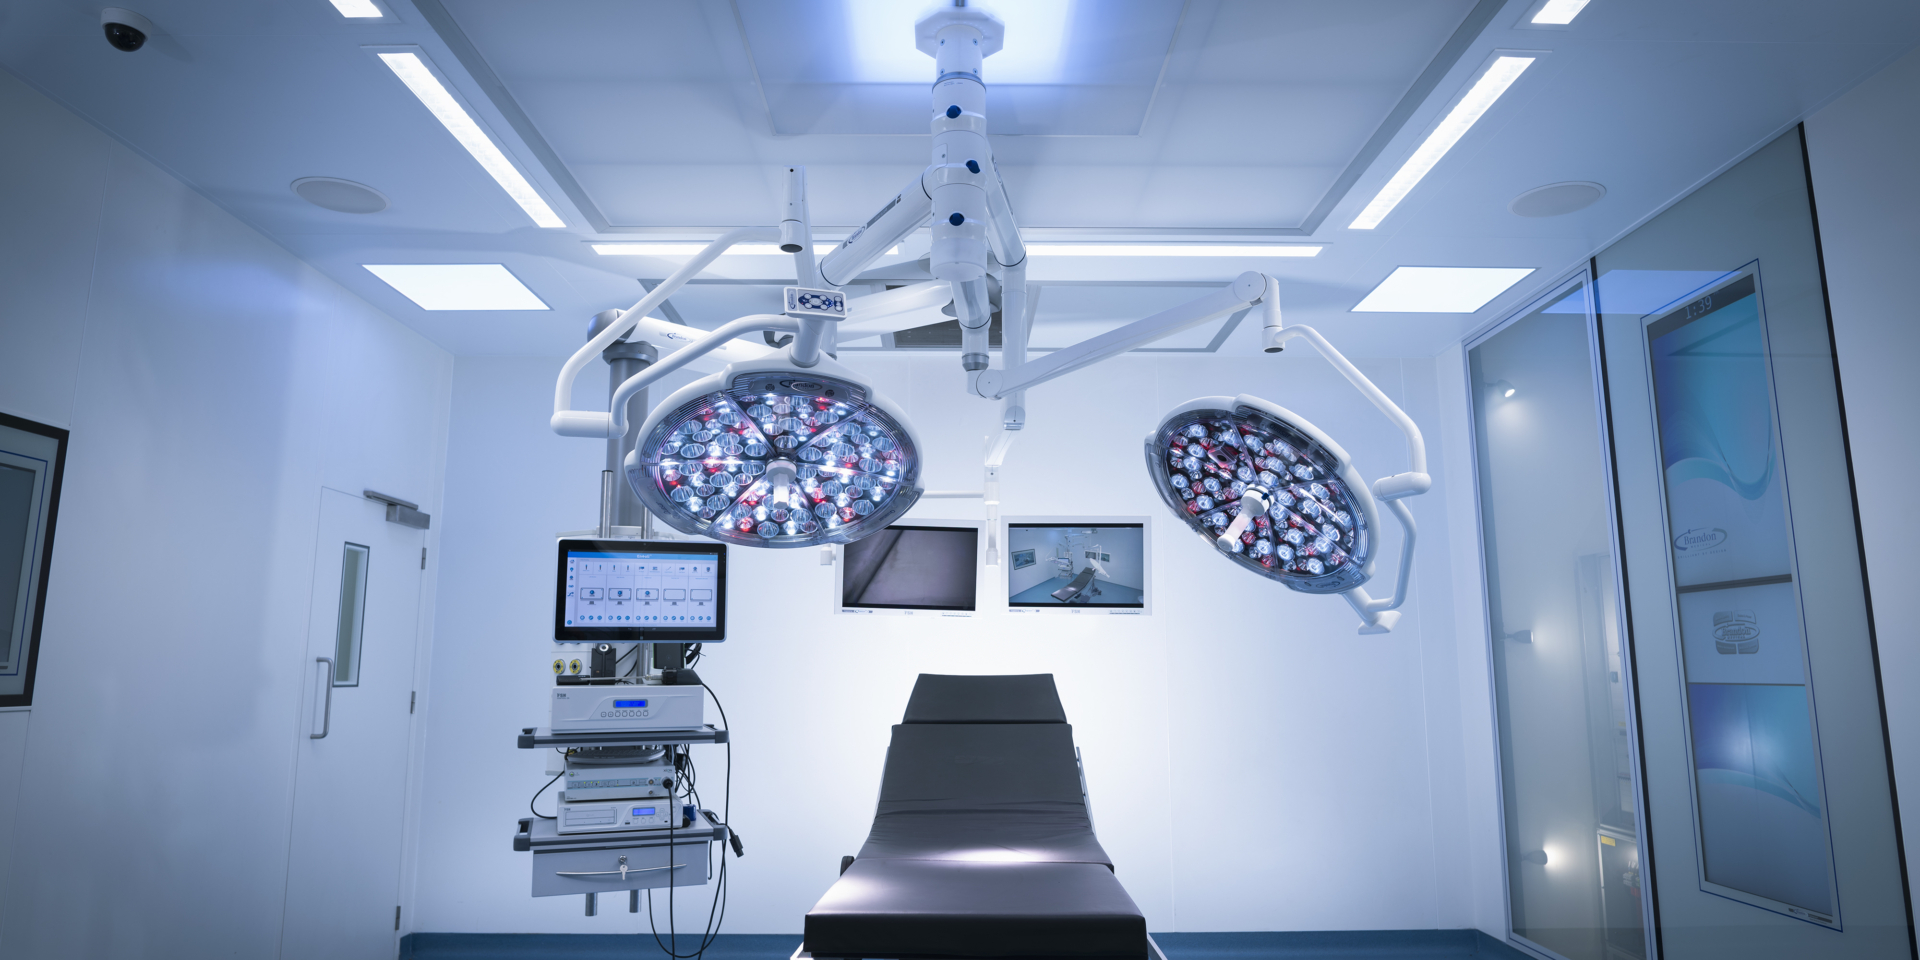 hybrid operating theatre brandon-medical-audio-visual-systems HD, 4k ultraHD video with near zero latency, for teaching